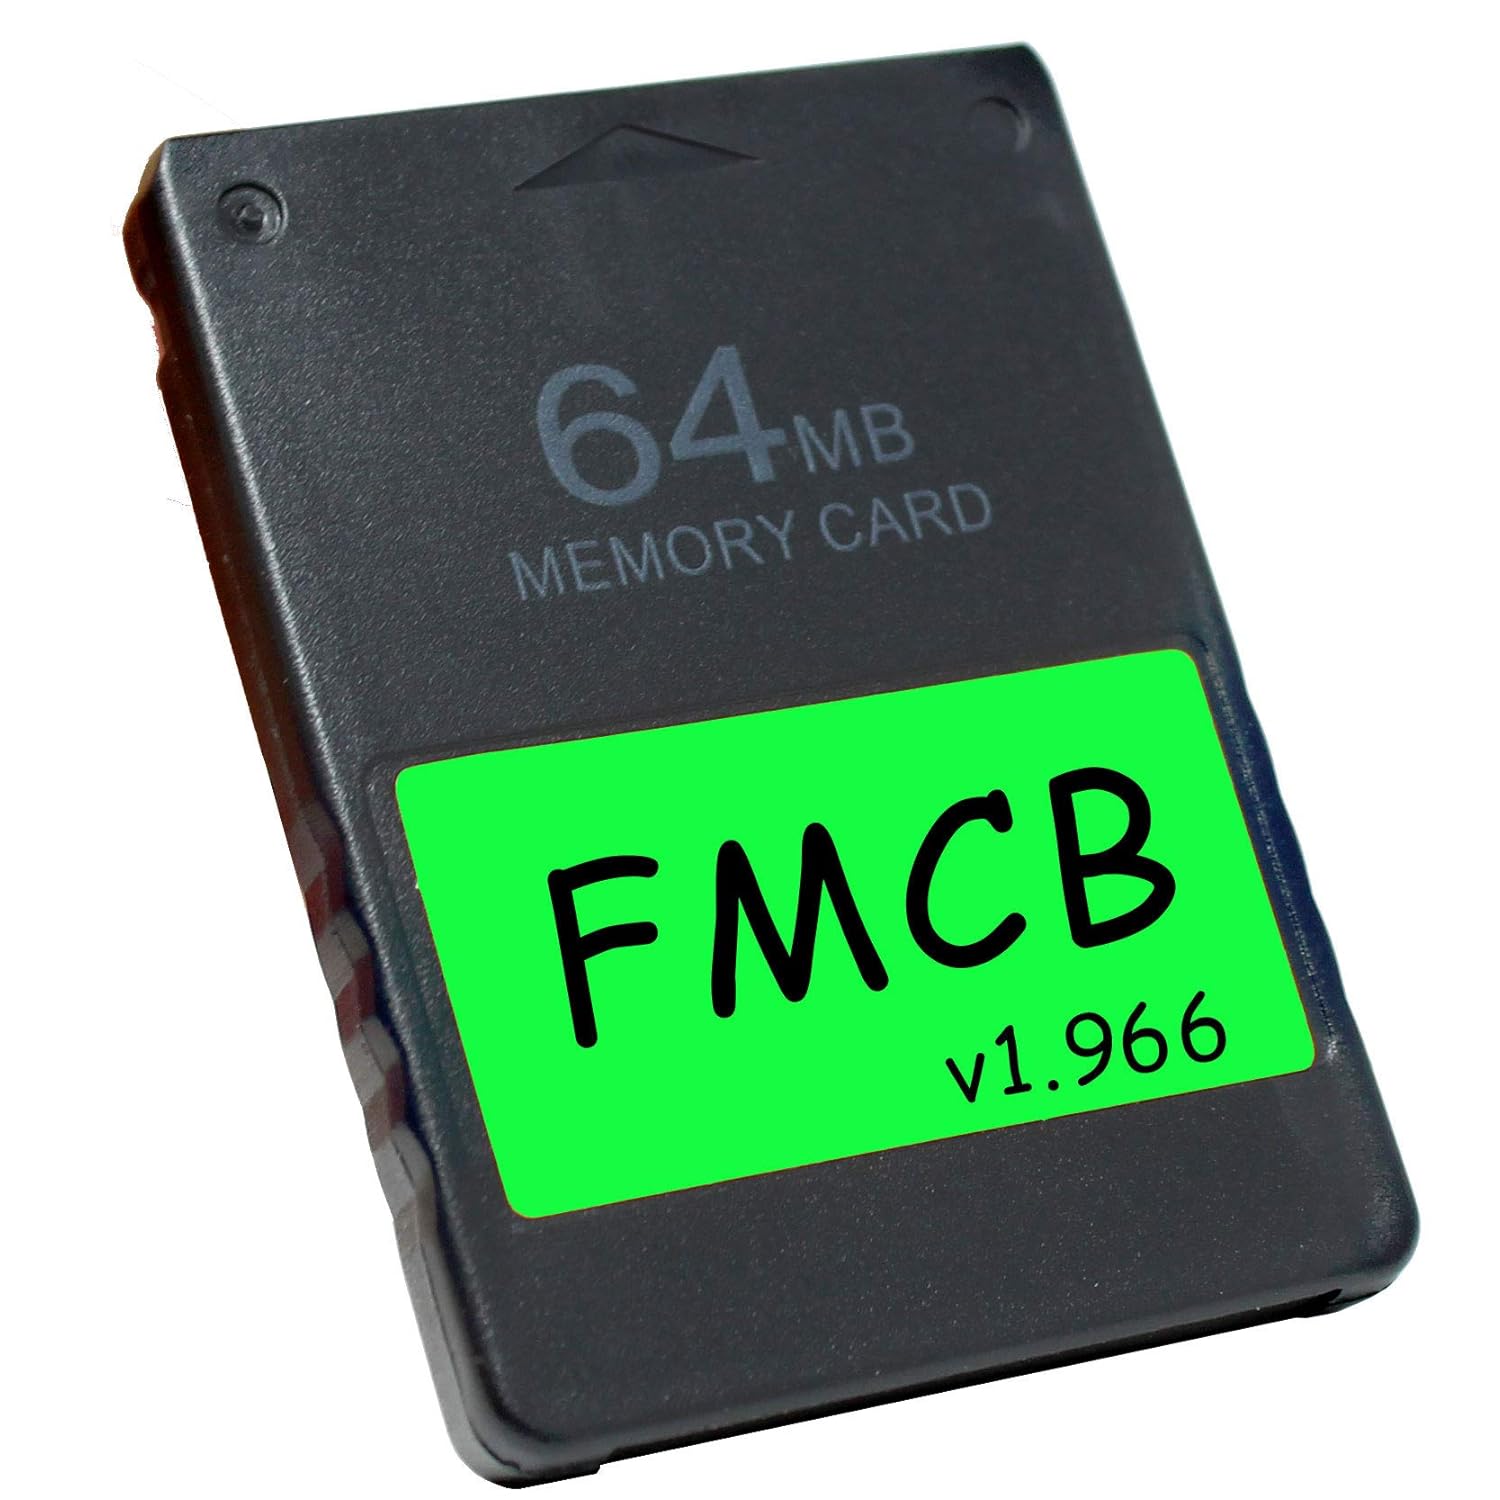 Great Choice Products Fmcb Free Mcboot Ps2 Memory Card V.1 966-64 Mb Memory Card For Ps2 Playstation 2 Games In Usb Hard Drive Or Hard Disk?